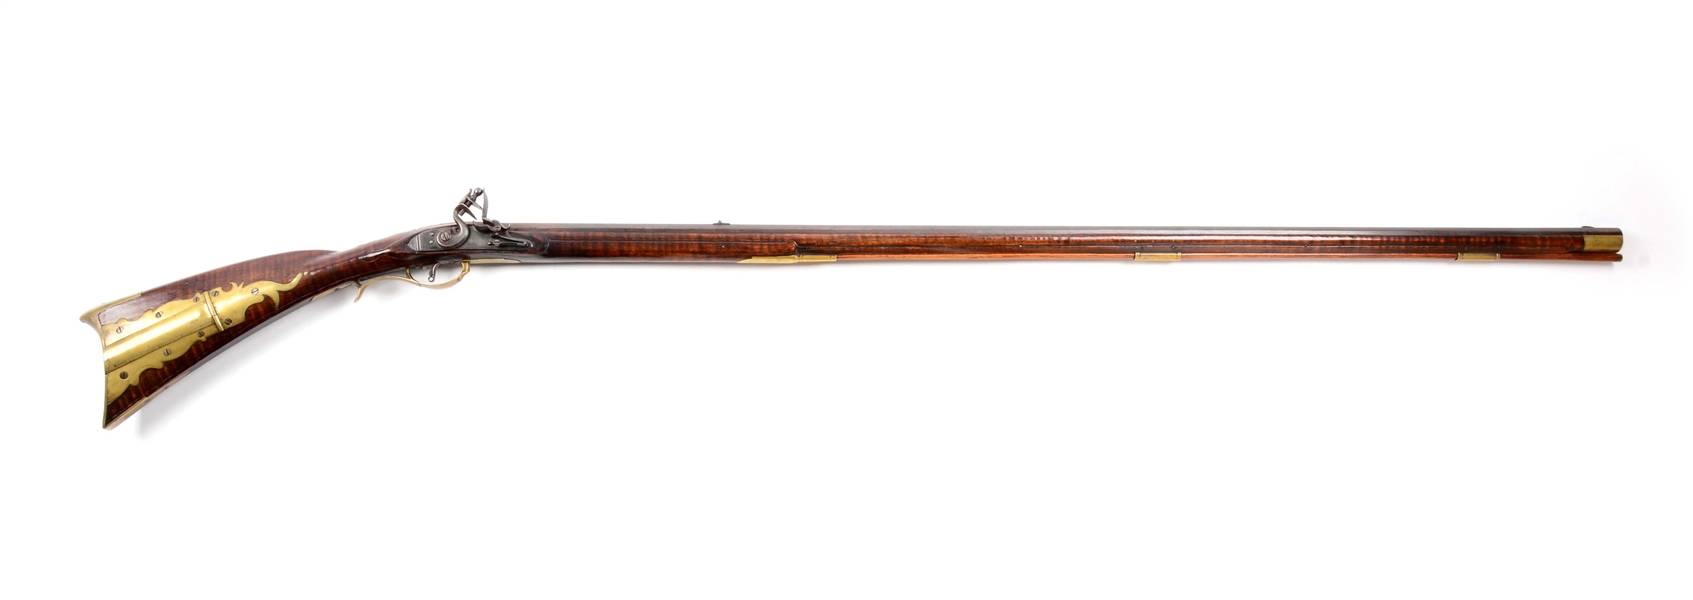 (A) FULLSTOCK KENTUCKY LONGRIFLE ATTRIBUTED TO HENRY MAUGER.